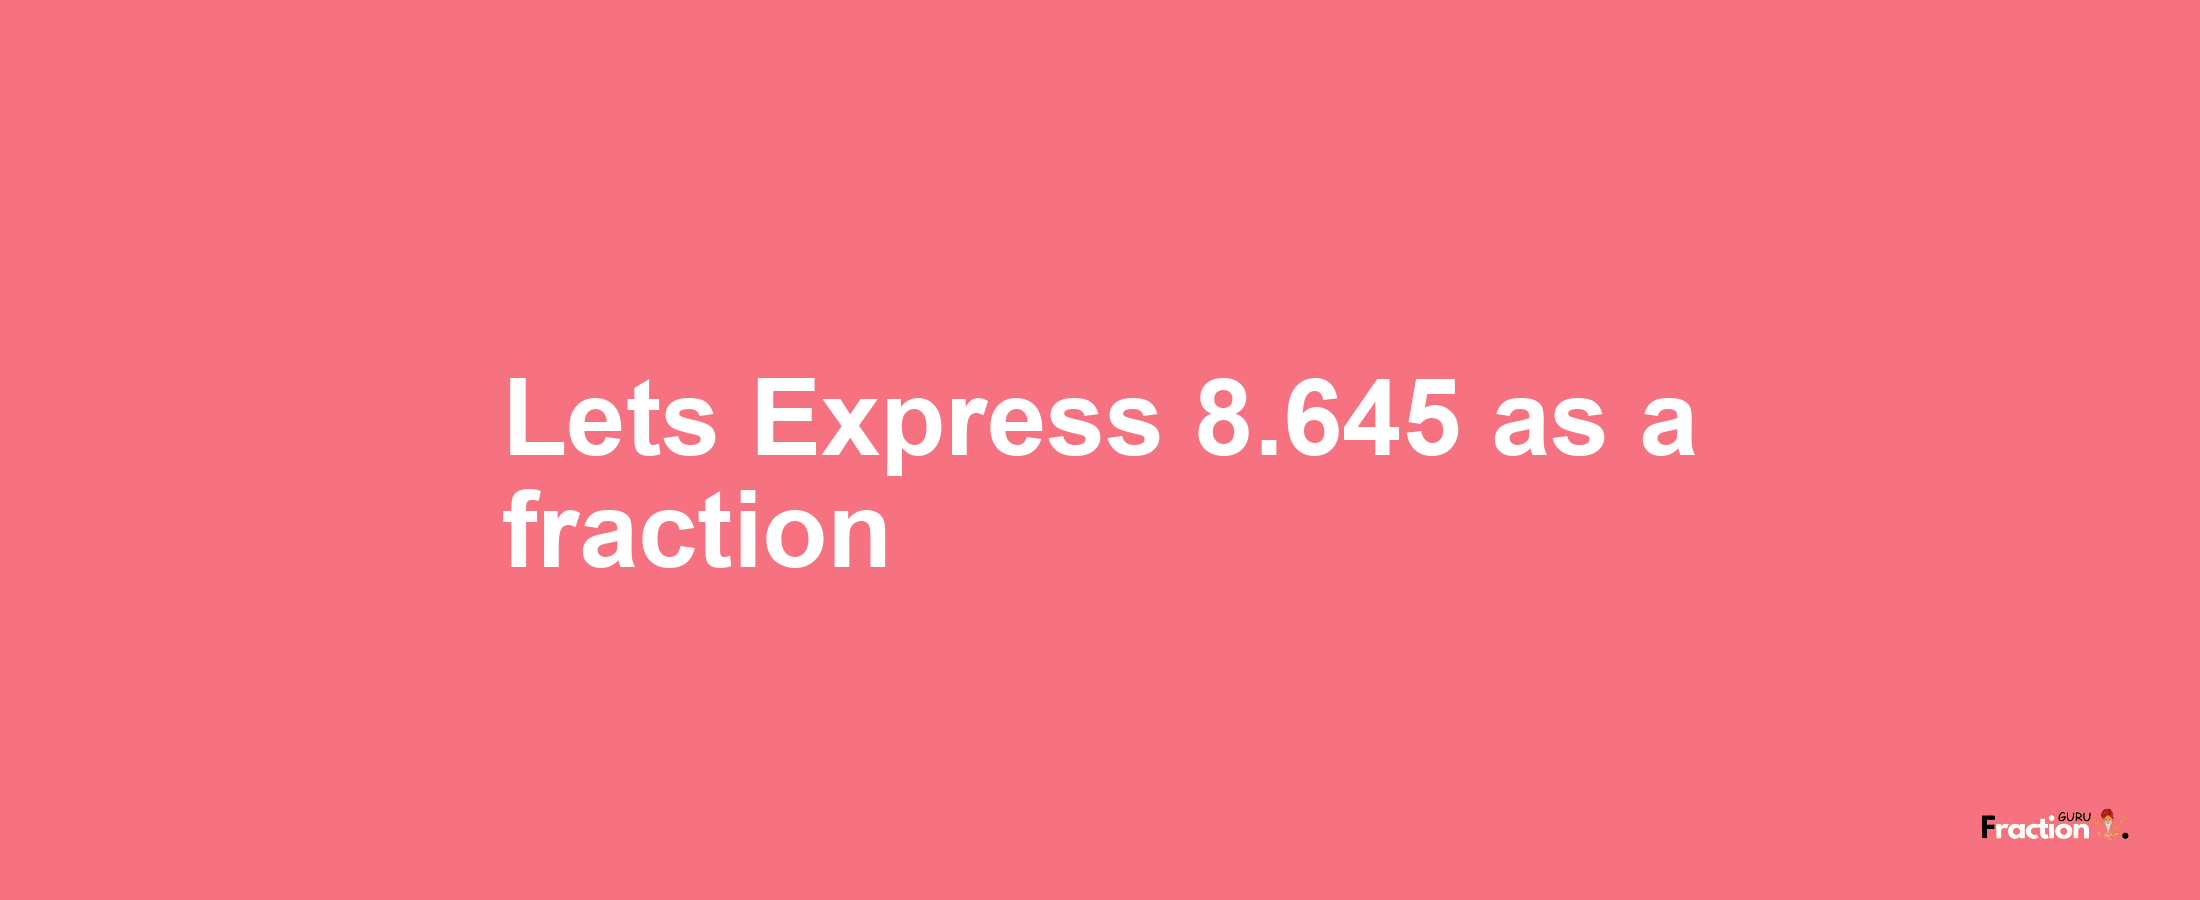 Lets Express 8.645 as afraction